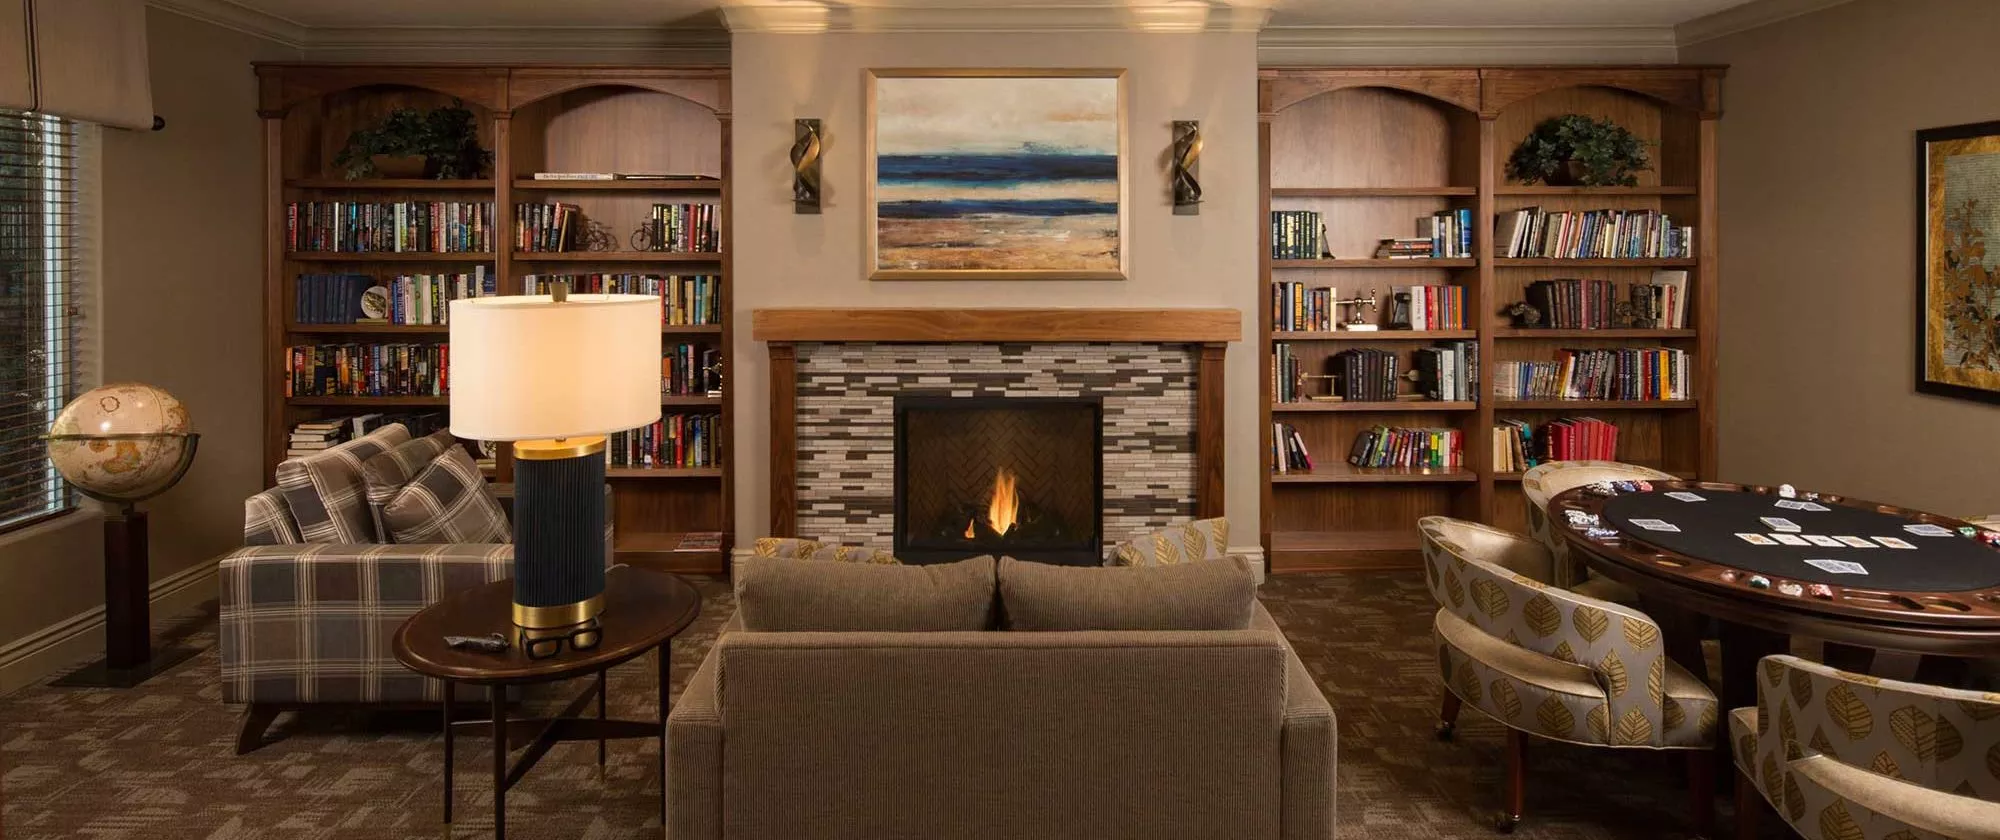 San Jose lounge with sofas, fire place, game table and book shelves